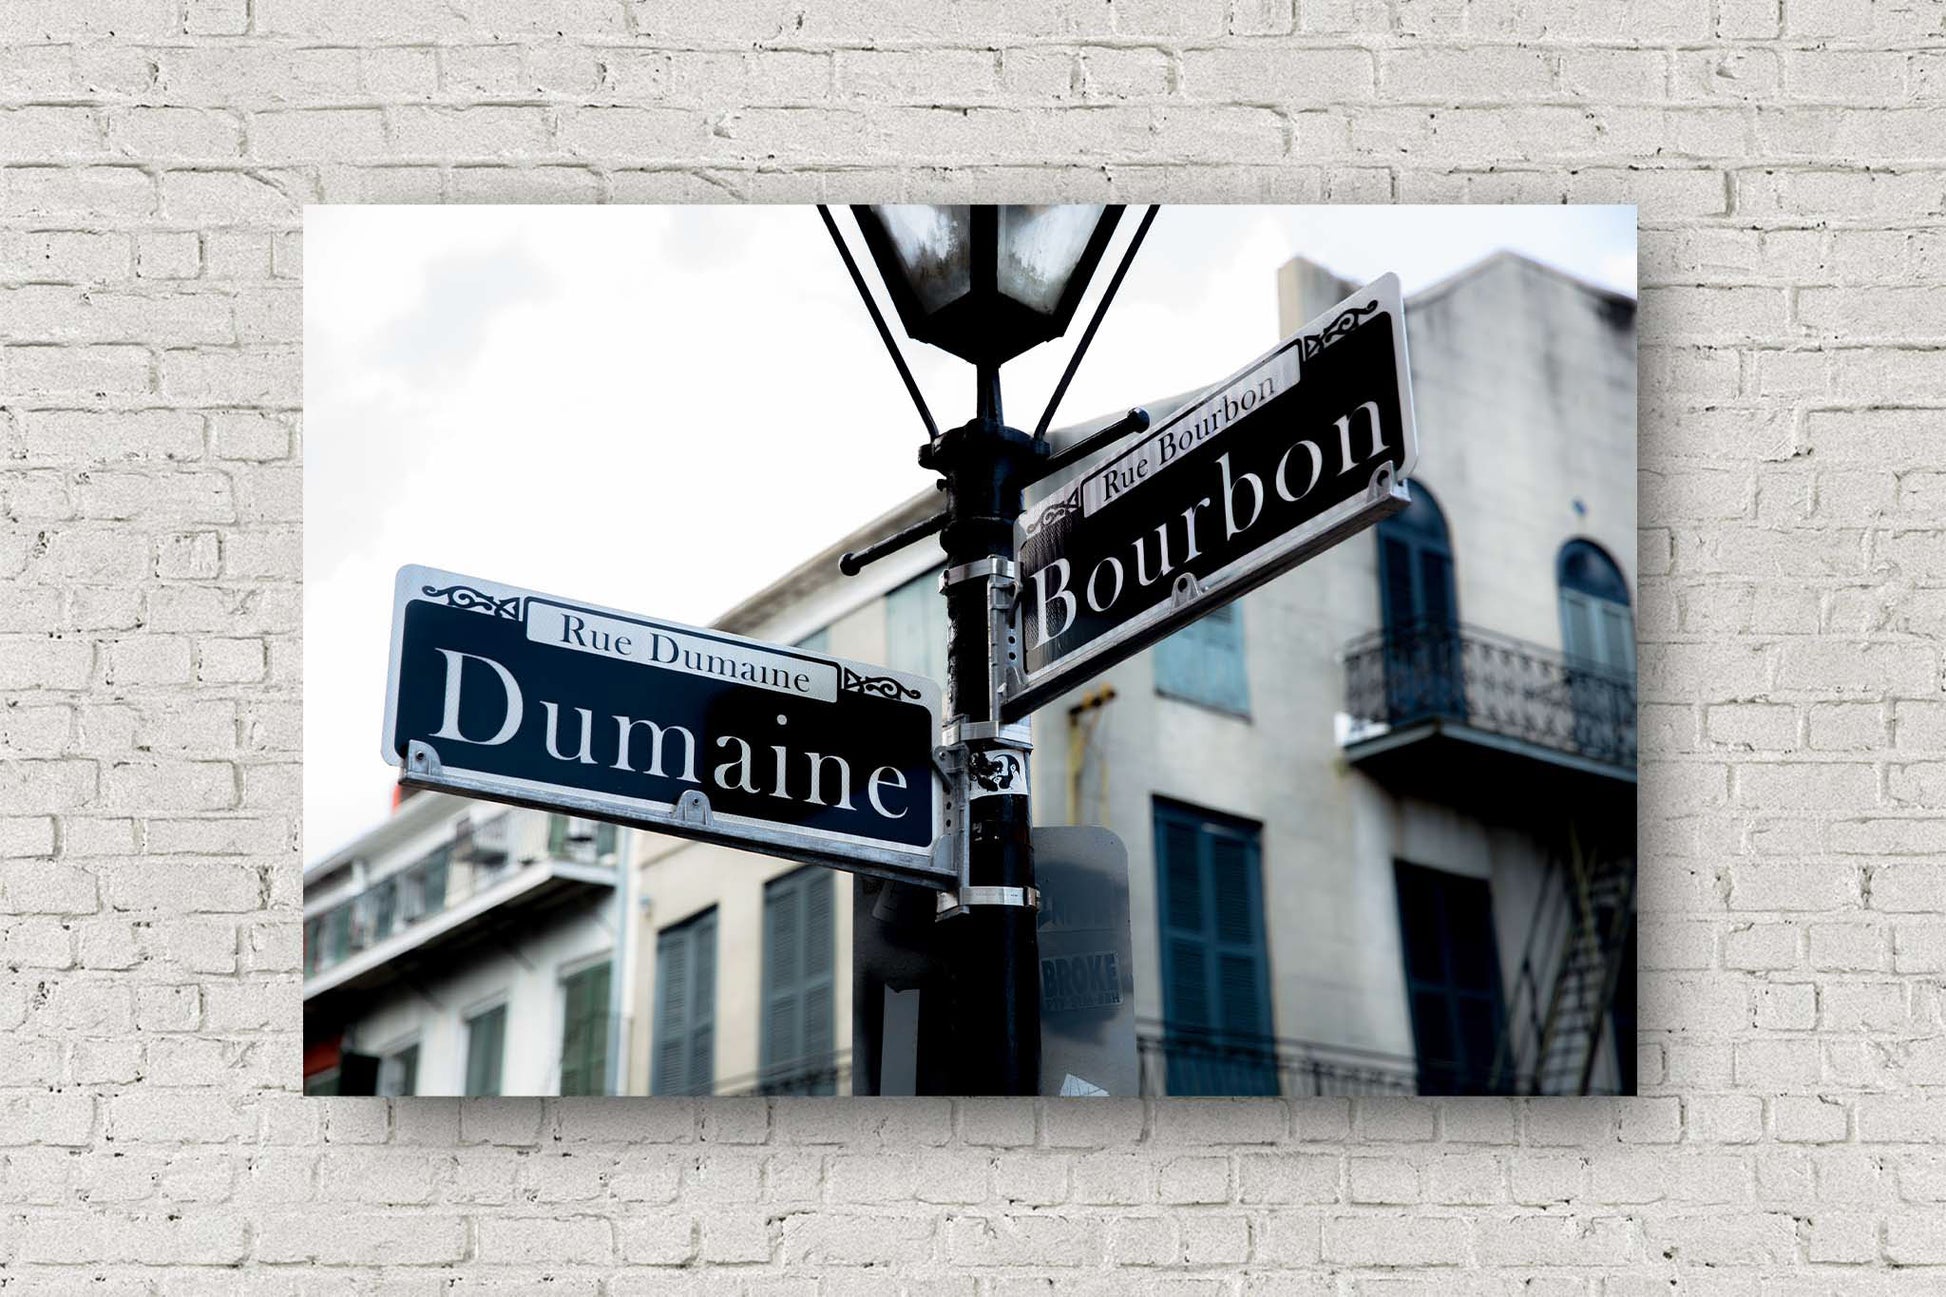 Southern metal print of street signs on a lamp post at the intersection of Dumaine and Bourbon Street in the New Orleans French Quarter by Sean Ramsey of Southern Plains Photography.